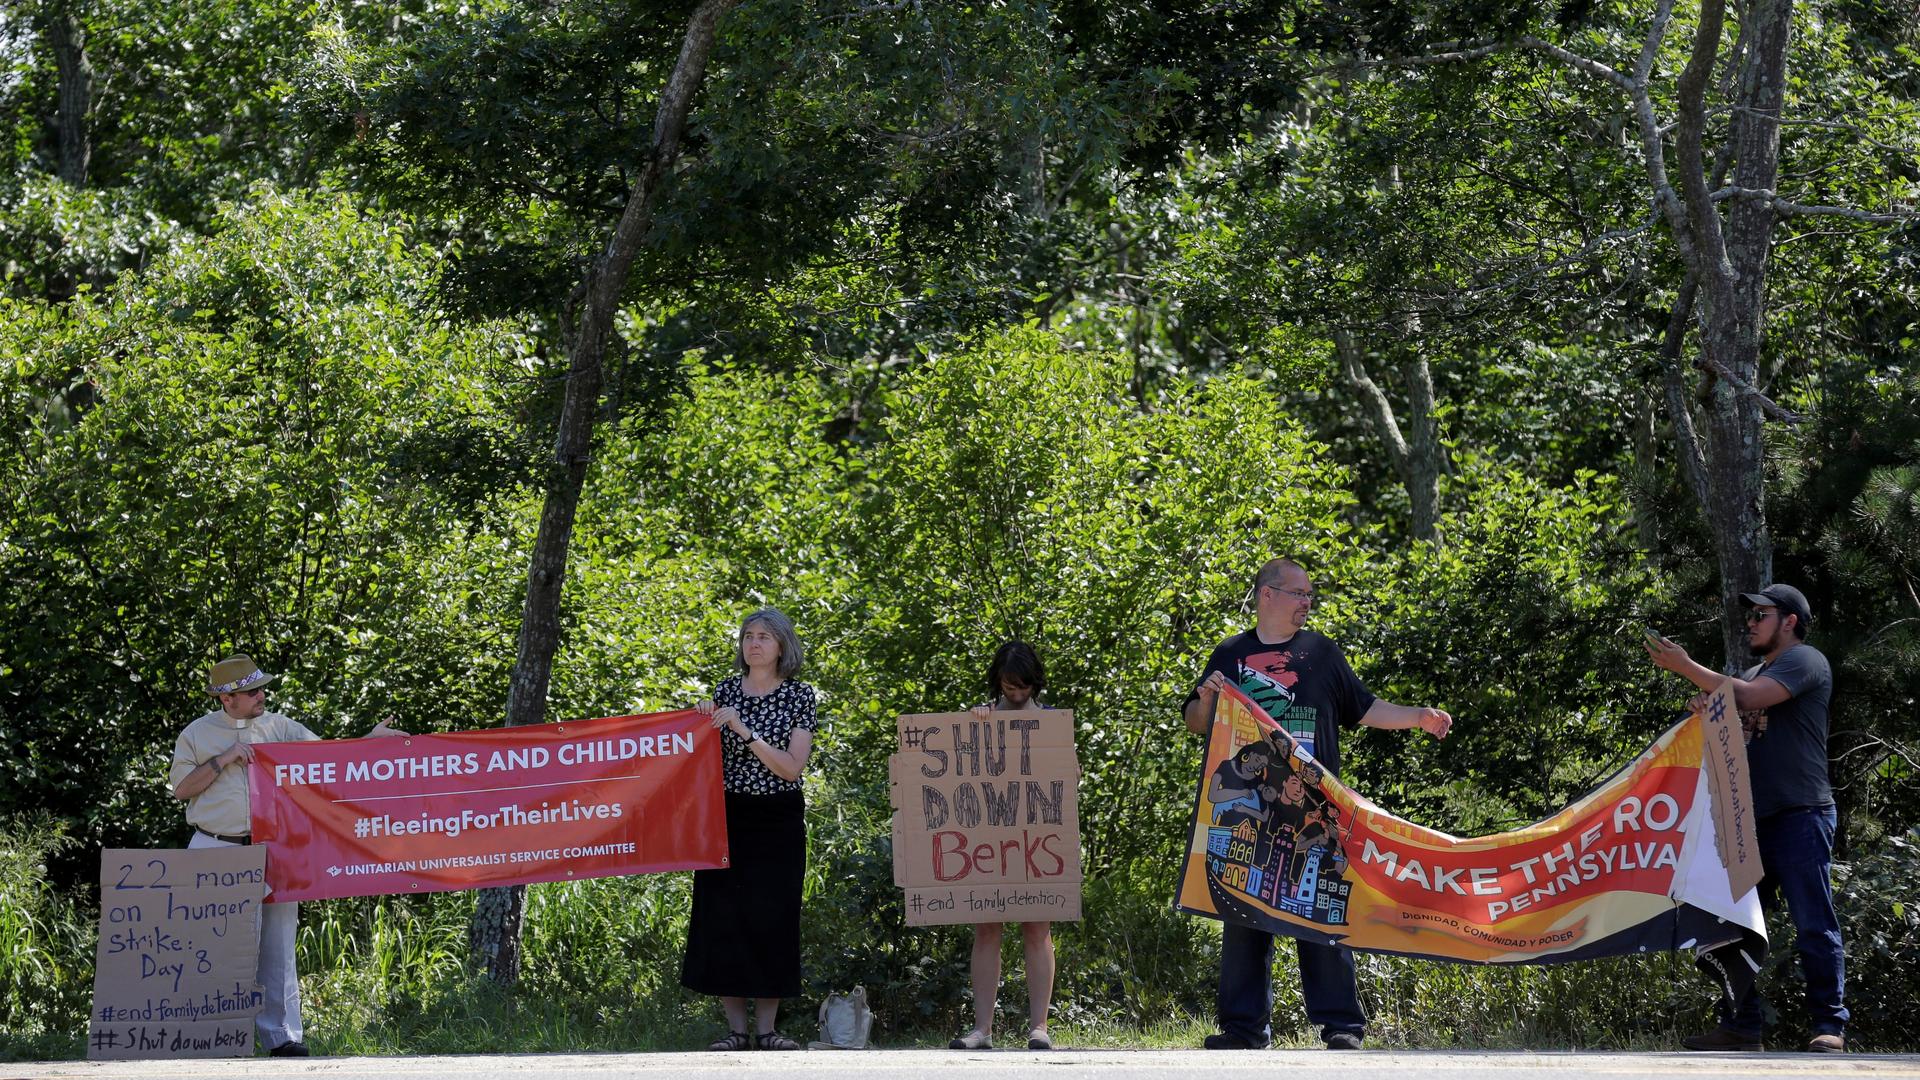 People stand on side of road in front of trees holding signs; one reads "Shut Down Berks"